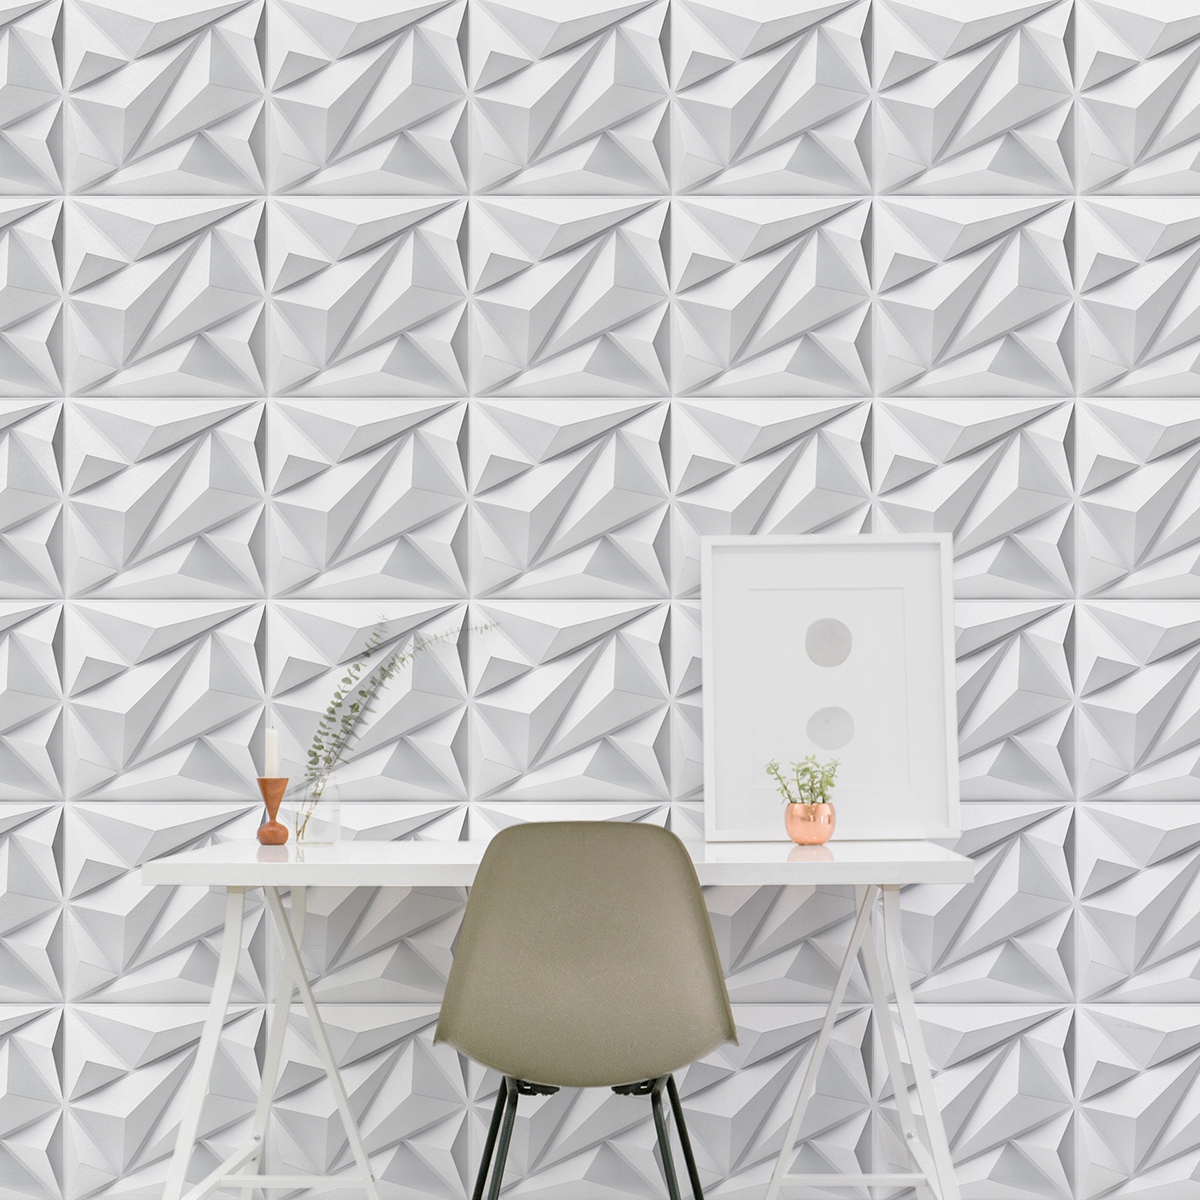 Art3d PVC 3D Diamond Wall Panel Jagged Matching-Matt White, for Residential and Commercial Interior Decor A10047